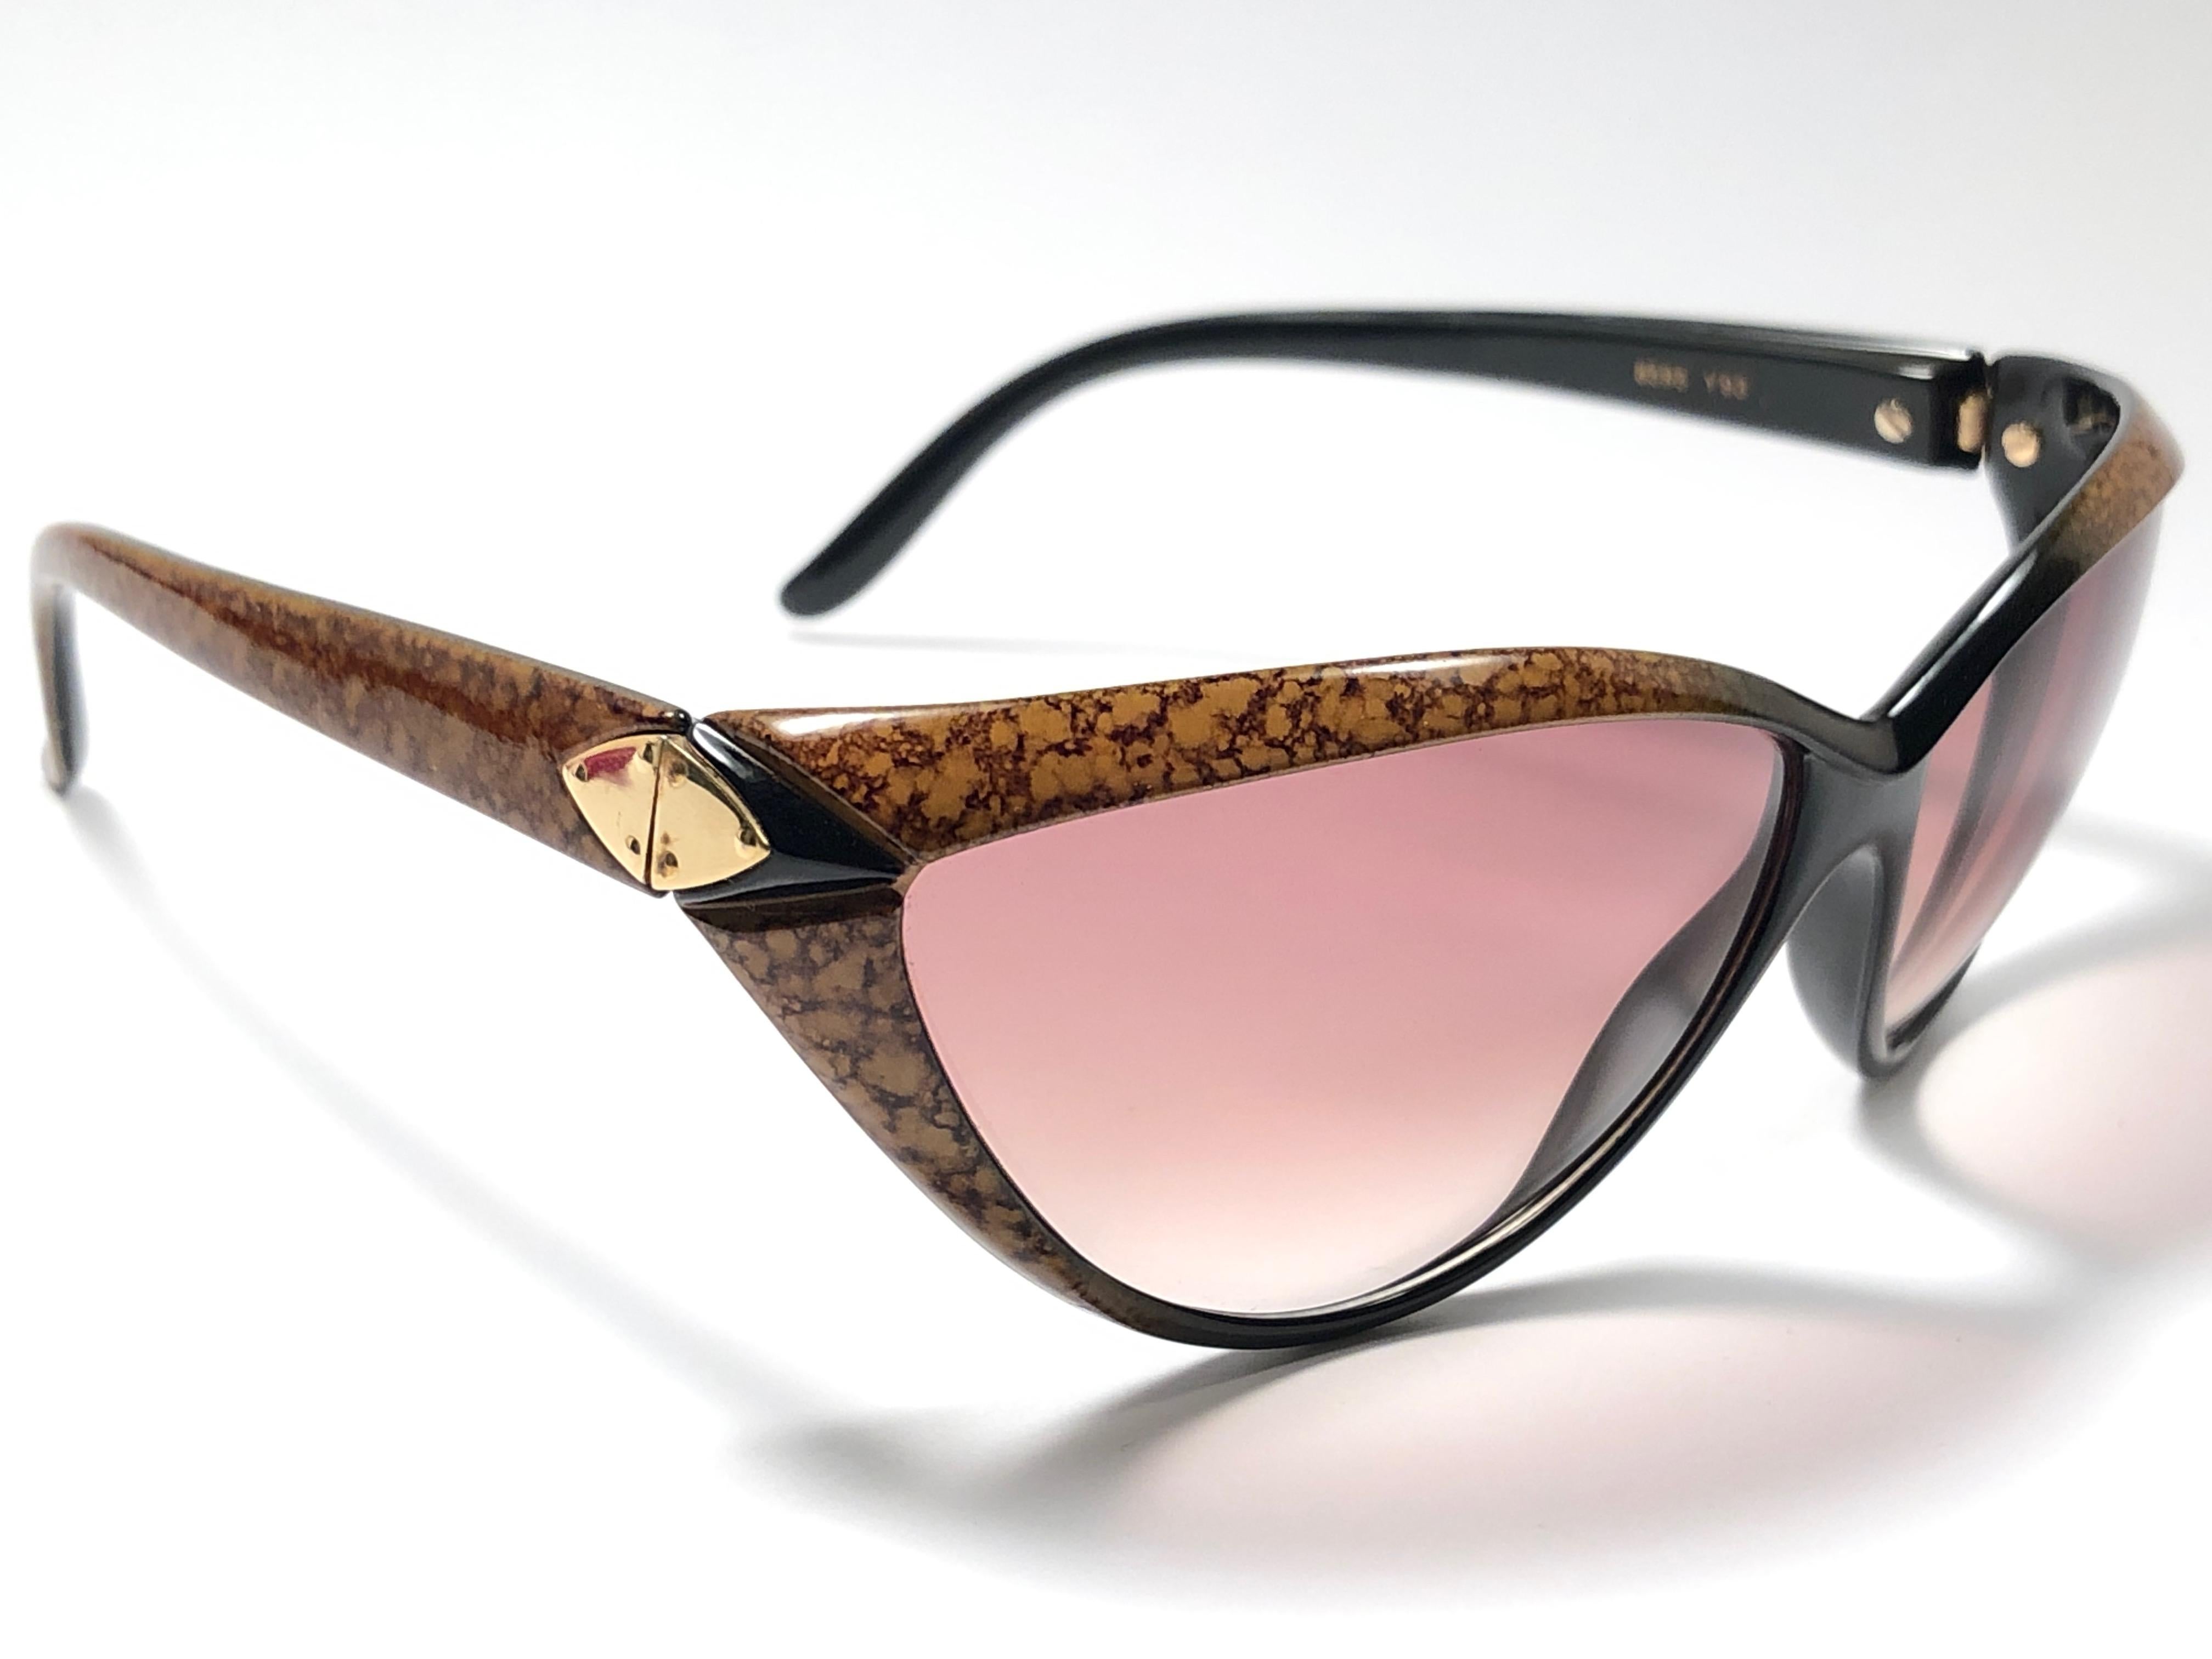 Super cool vintage Yves Saint Laurent 1990’s sunglasses. Cat eyed frame with gold ornaments on the temples. Brown lenses.

This pair is an style statement. The piece could show minor sign of wear due to storage.

A great opportunity to achieve a